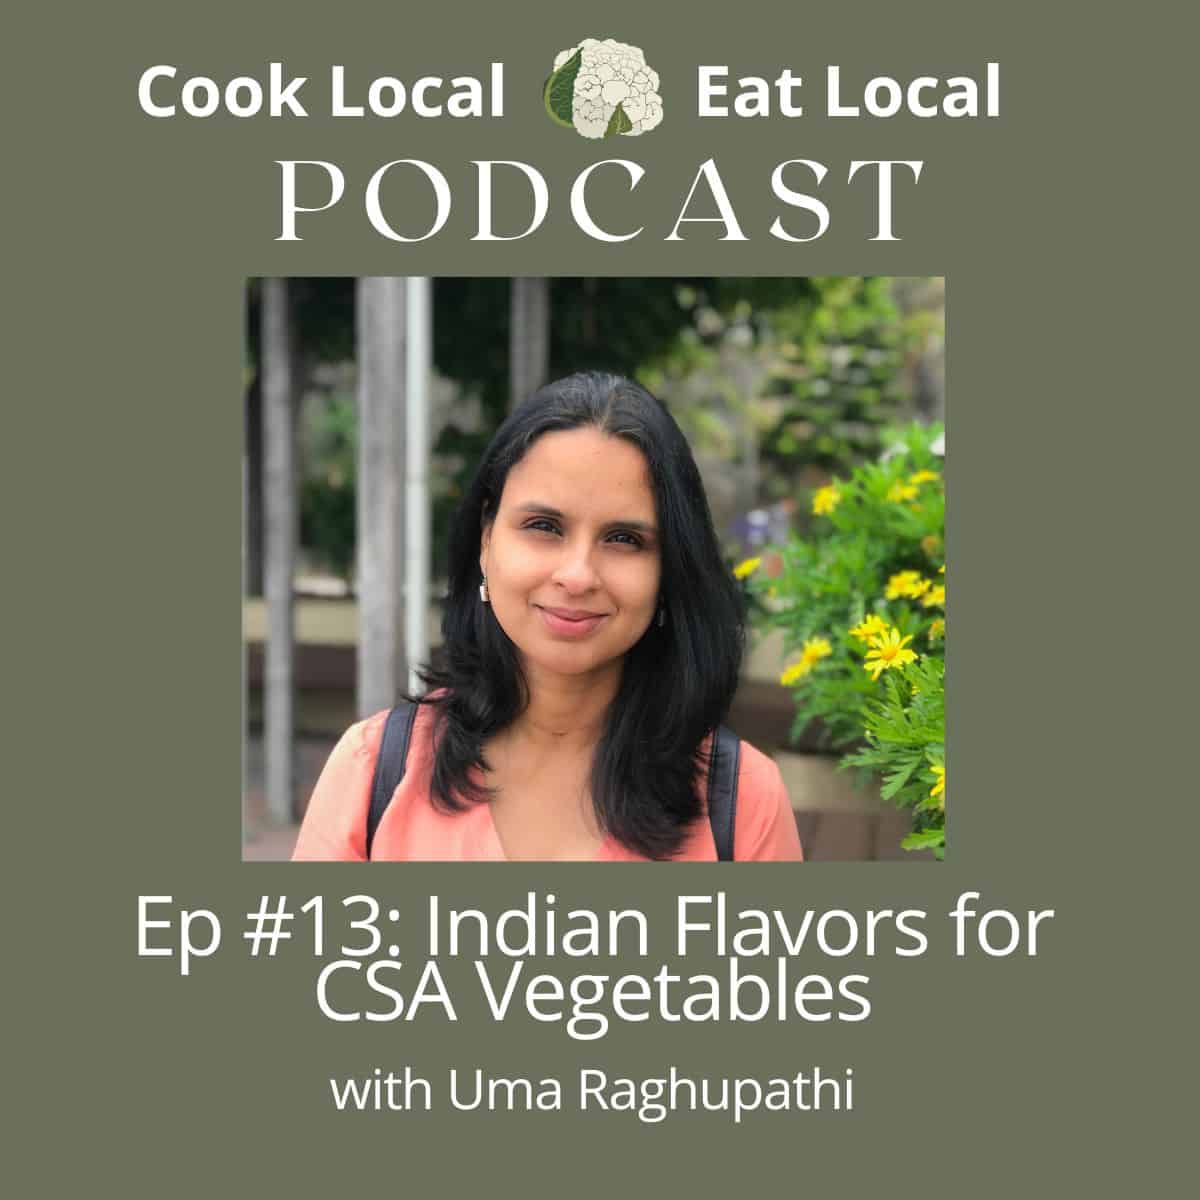 Cook Local podcast cover with a photo of Uma Raghupathi and the text with the title "Indian Flavors for CSA Vegetables". 